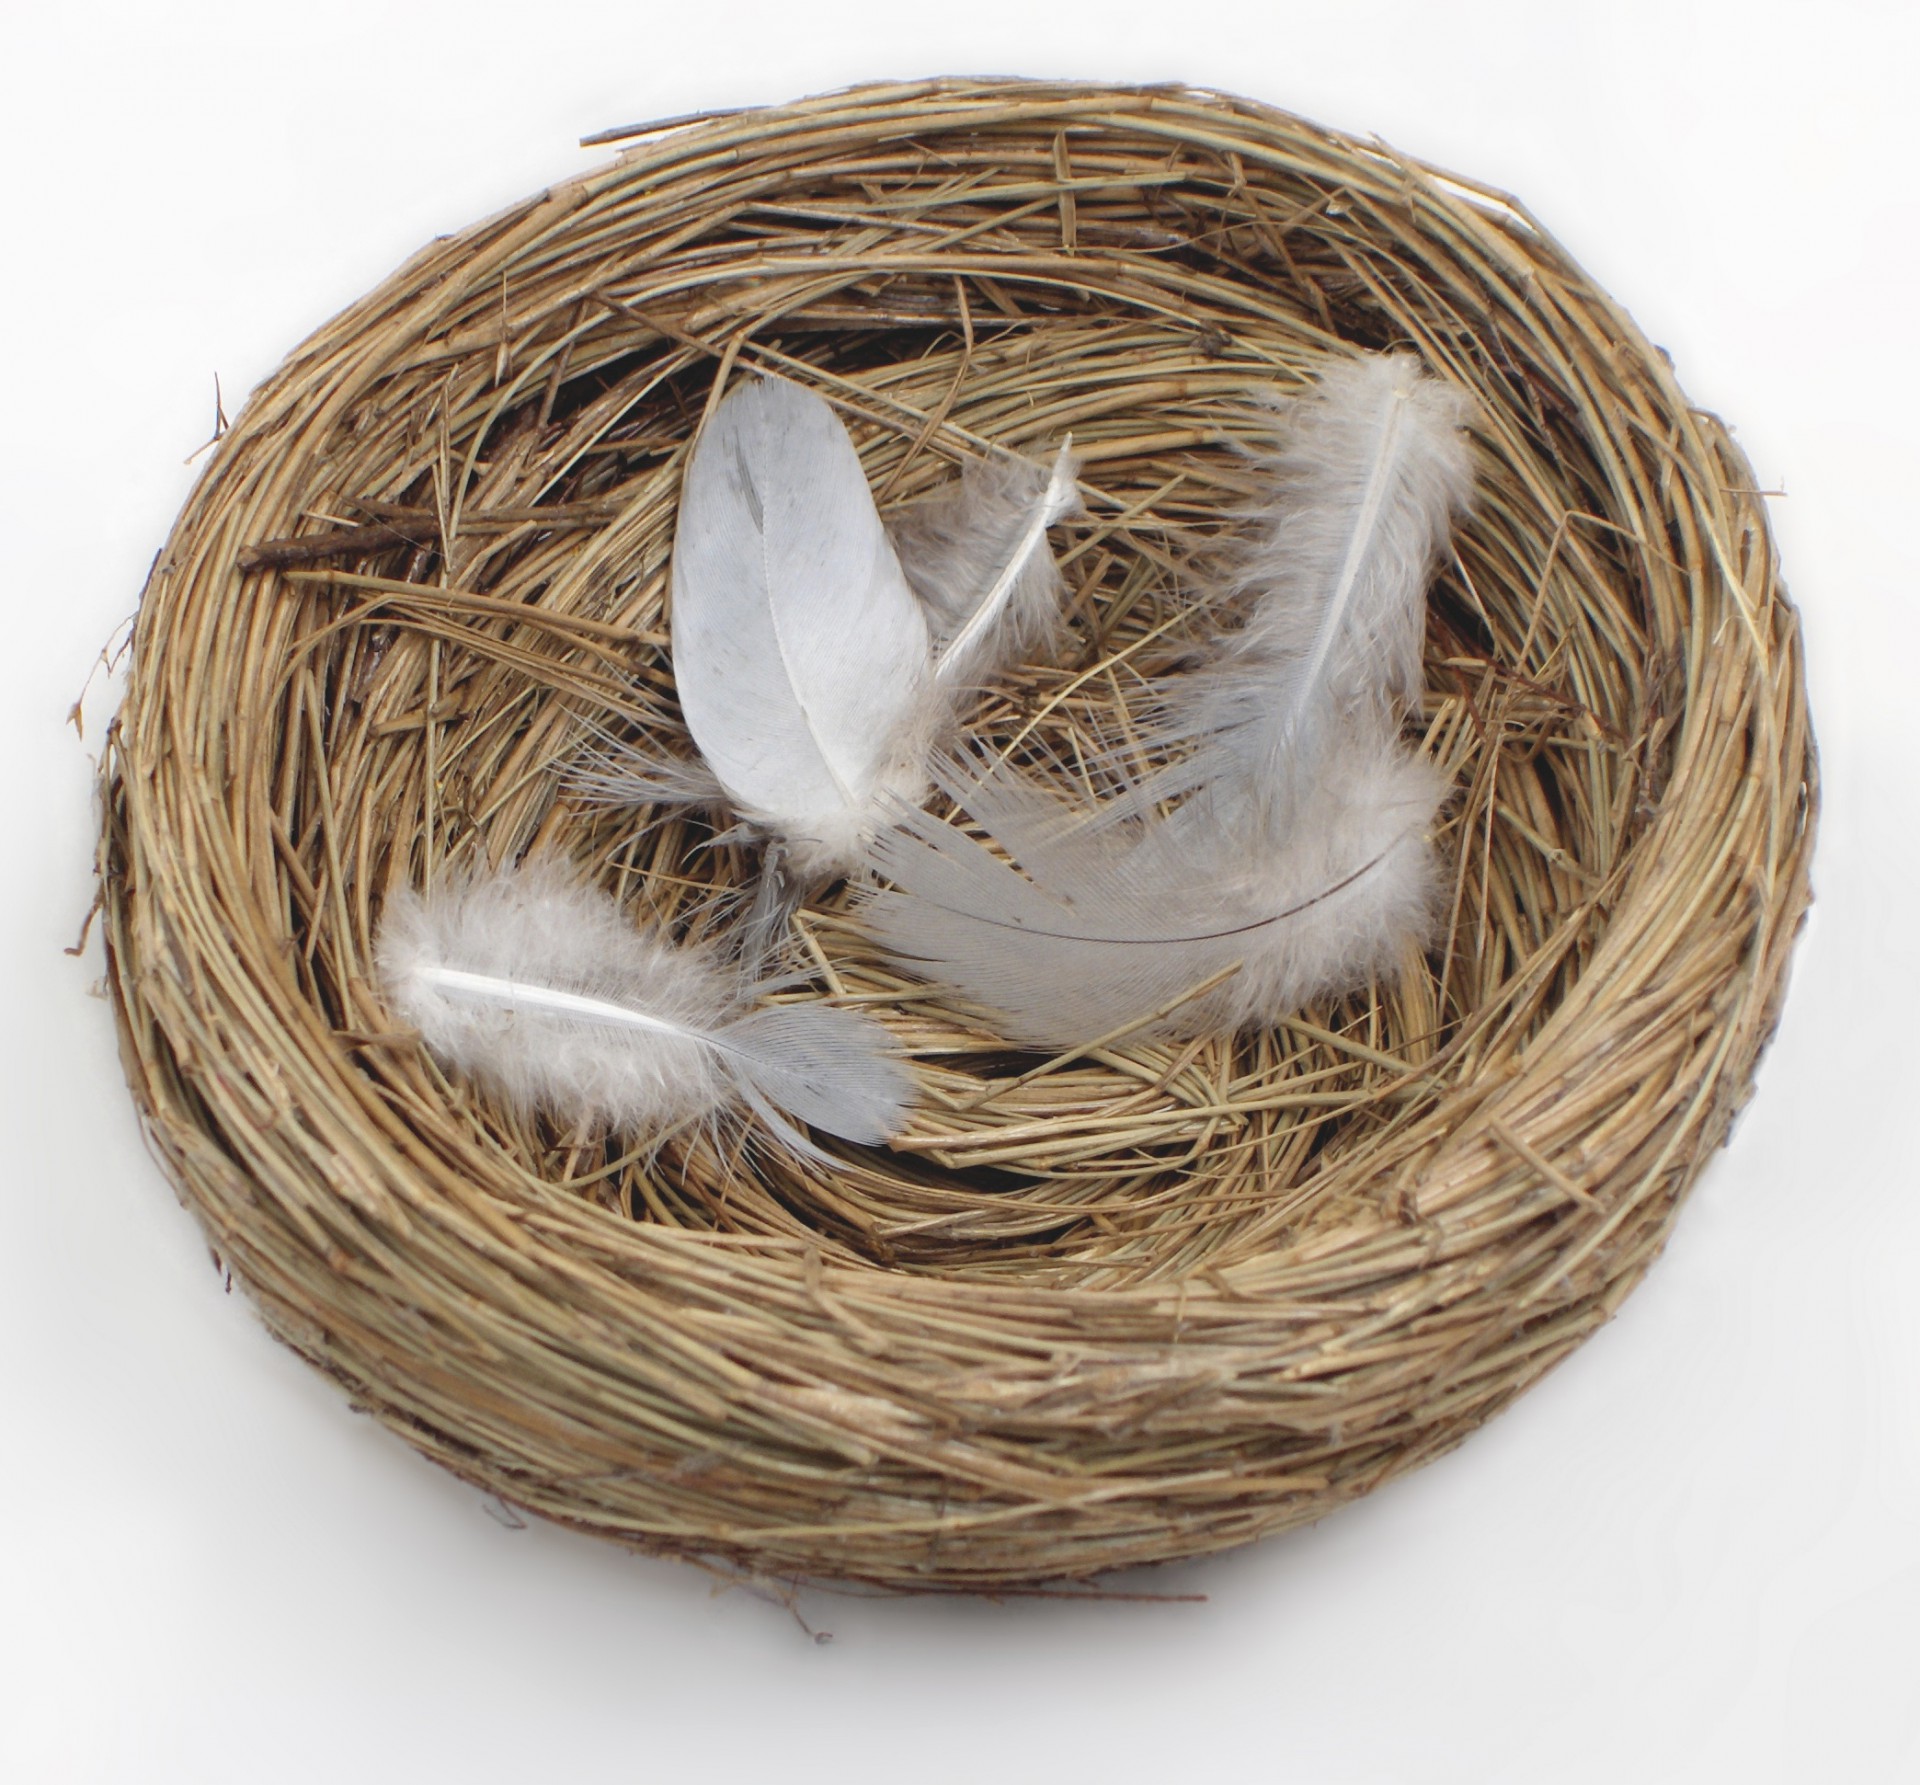 Susie's Empty Nest Syndrome: "It's Why I Wanted To Sell My H...